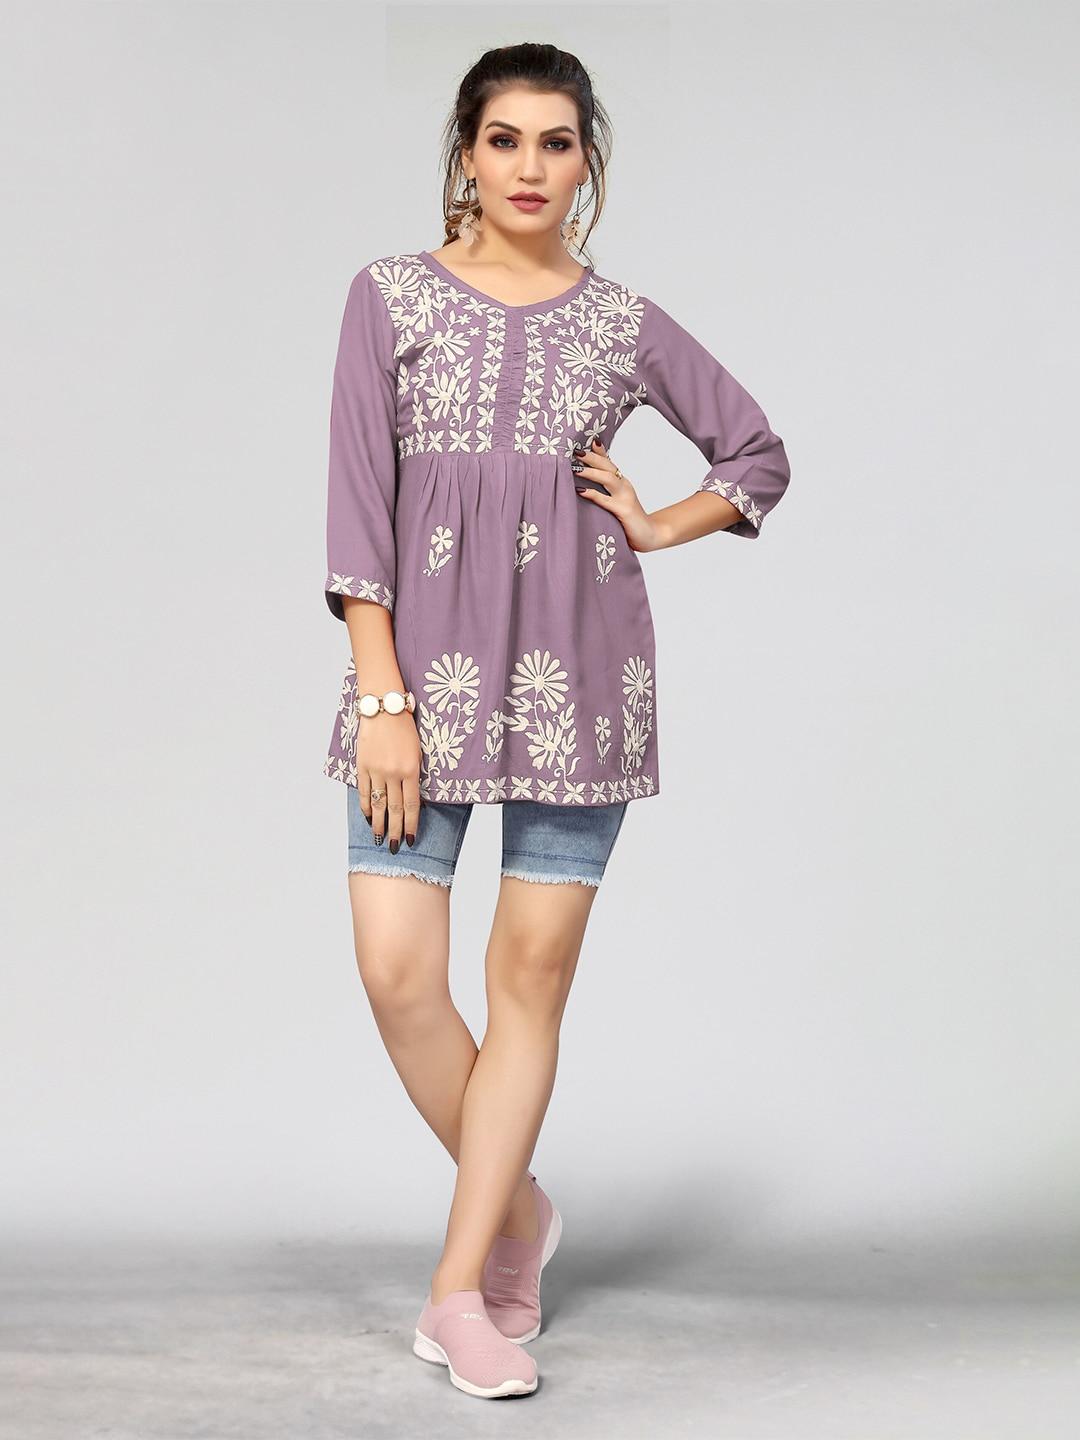 Winza Designer Floral Embroidered A Line Top